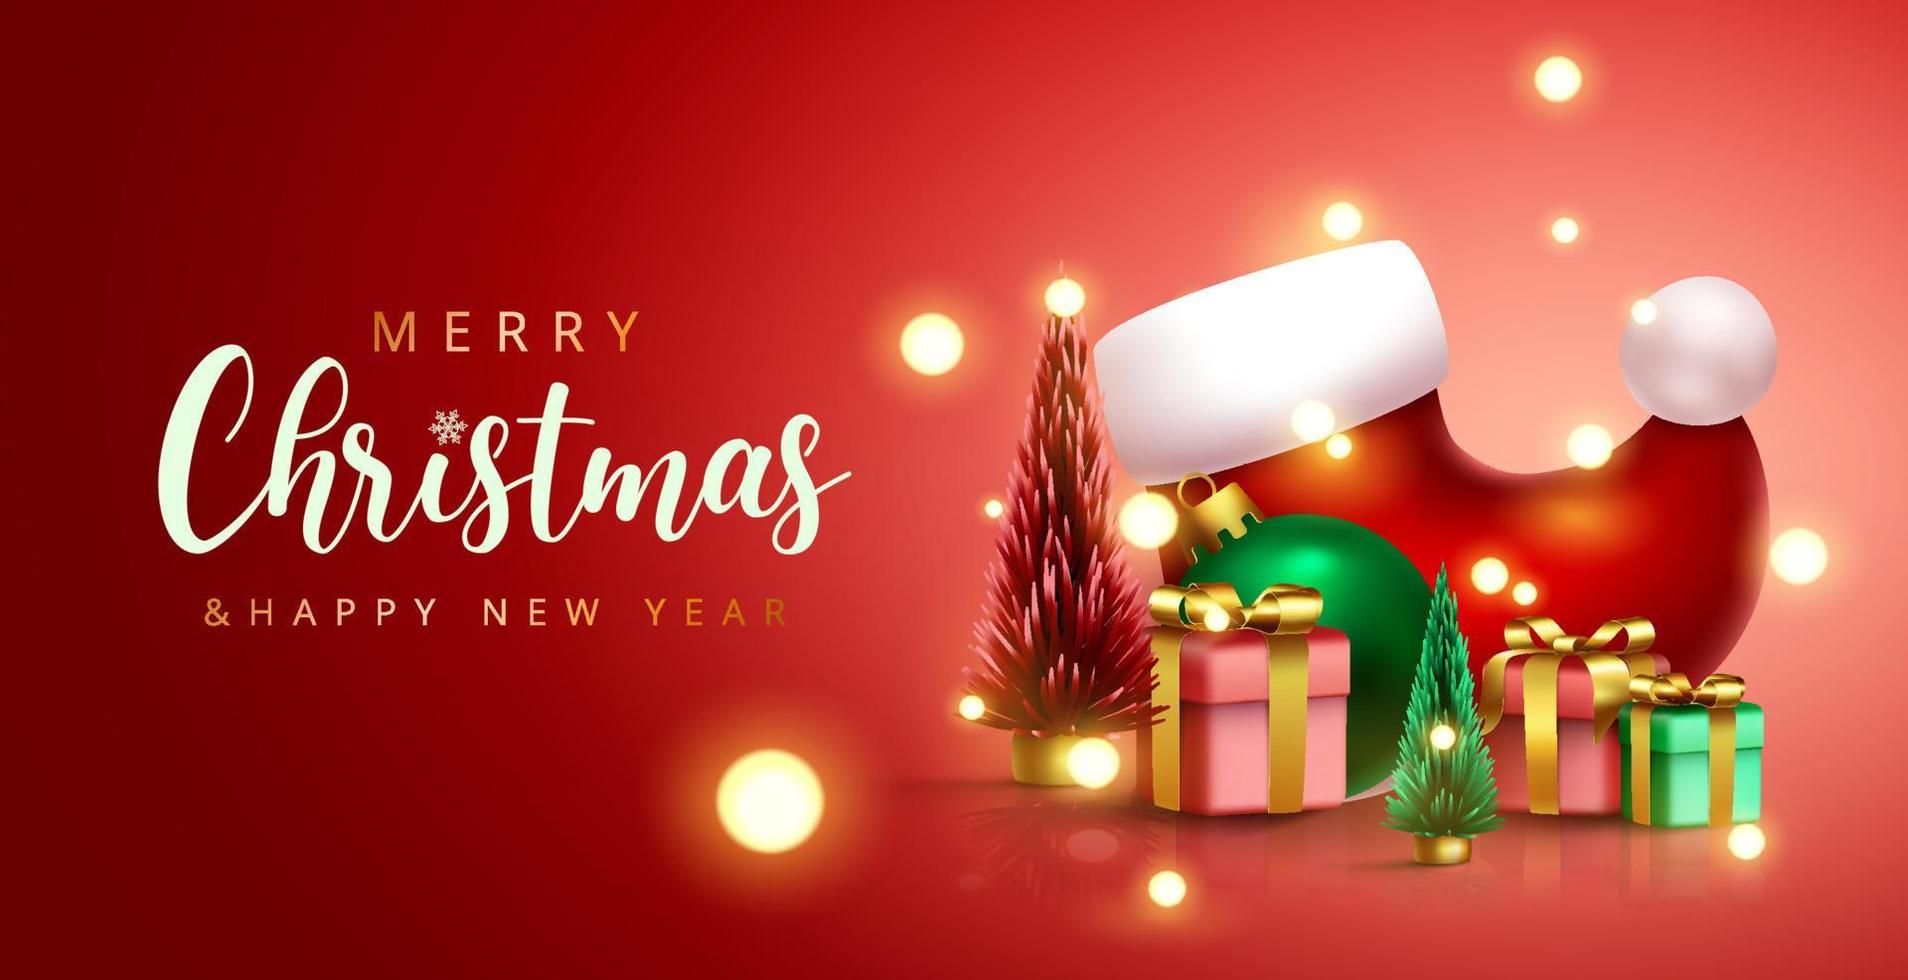 Christmas greeting vector design. Merry christmas and happy new year ...